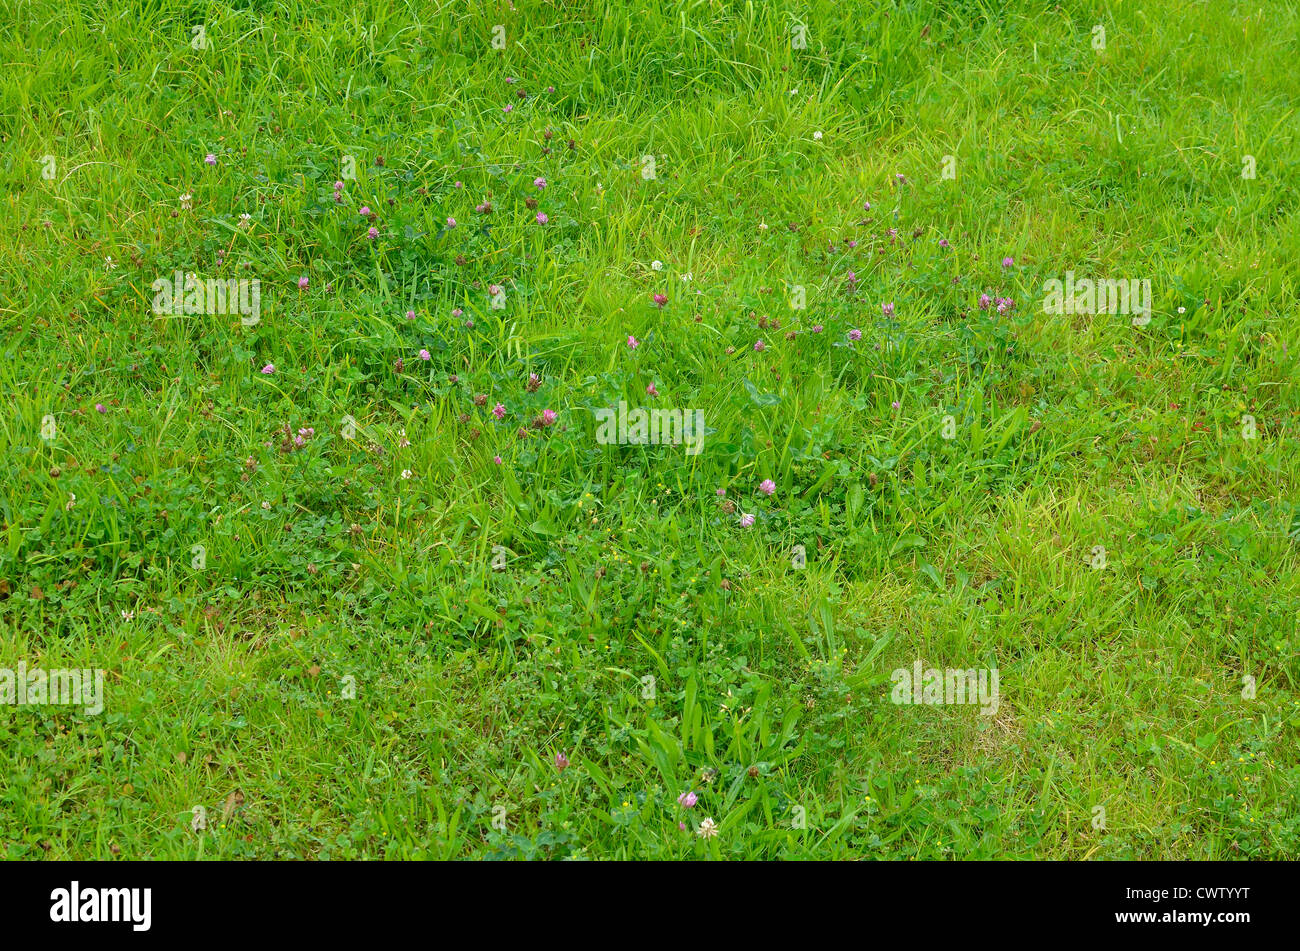 Patch of lush green sward in field of pasture / grass, intermixed with red clover. Stock Photo